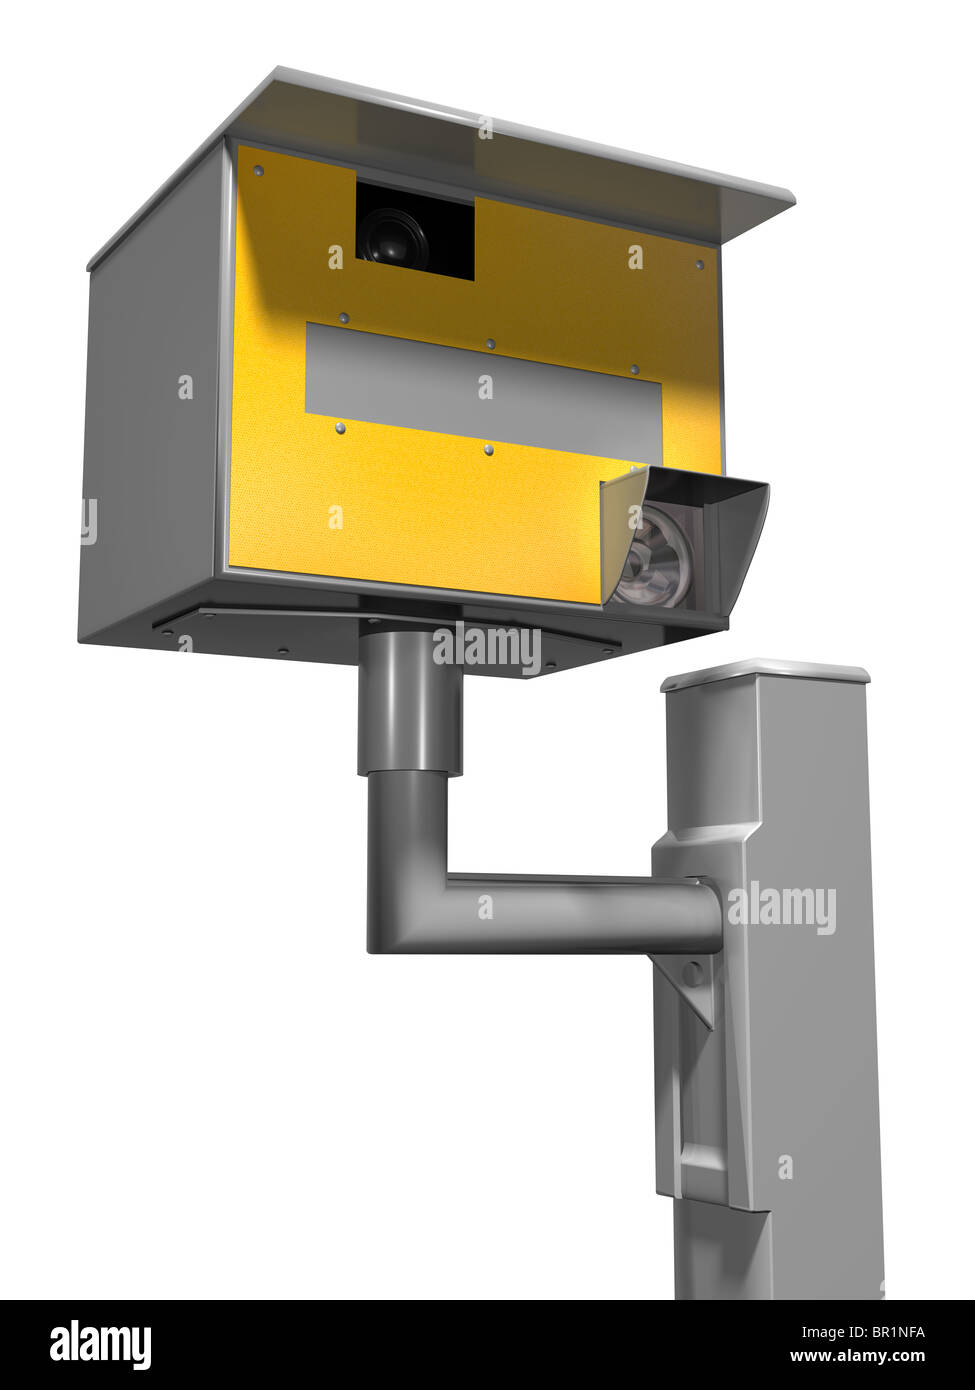 Isolated illustration of a road safety speed camera Stock Photo